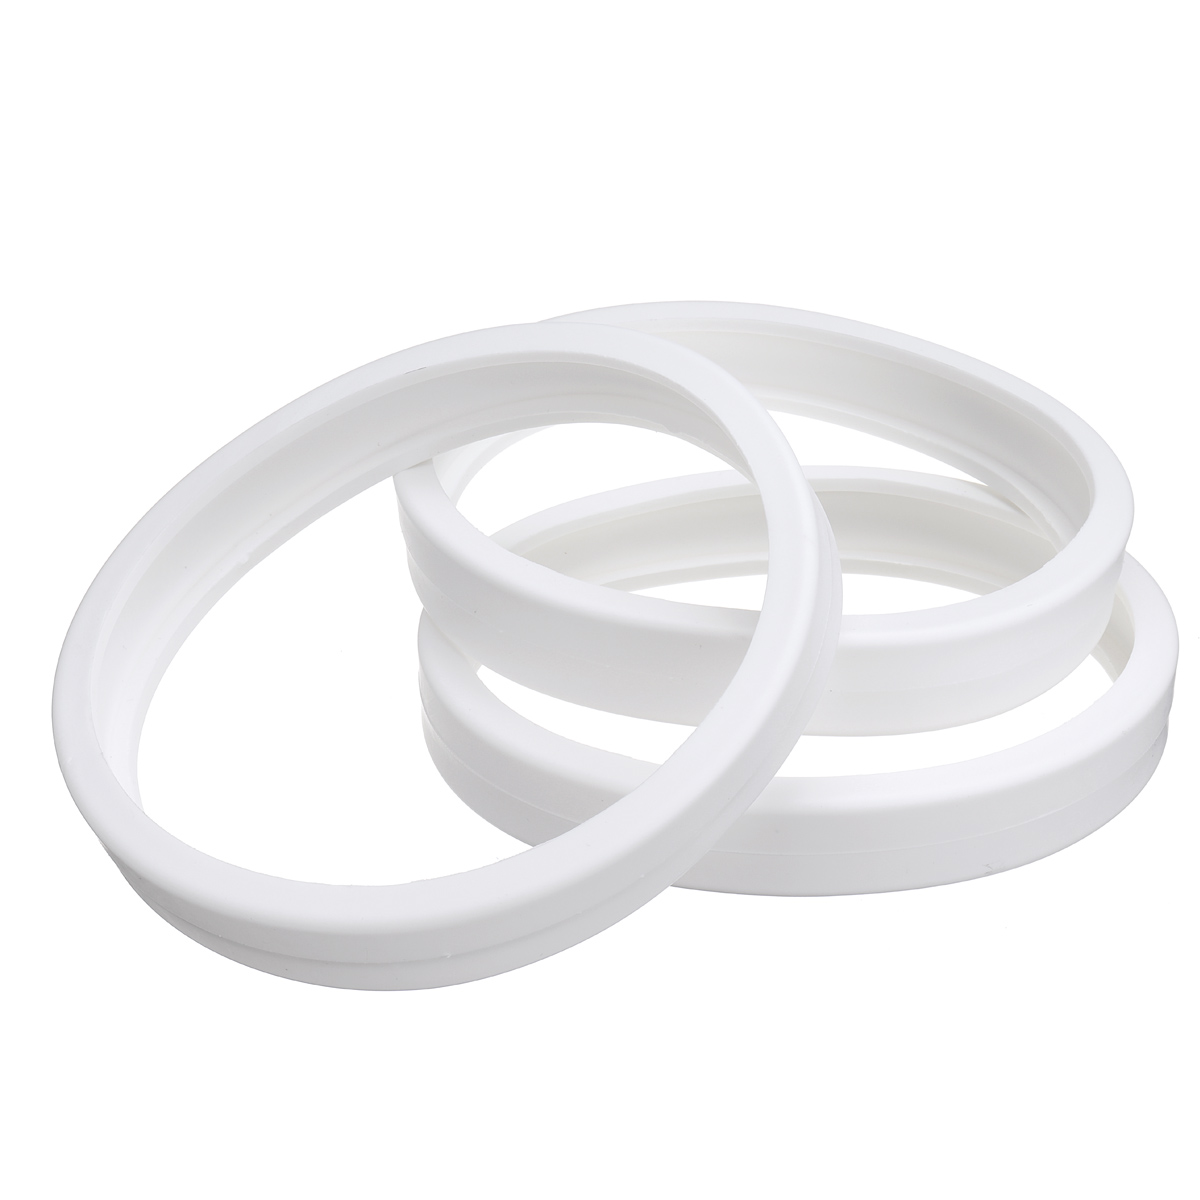 Find 3PCS Pool Cleaner All Purpose Rubber Ring Replacement For Polaris Part C10/C-10 Models 180/280/360/380 for Sale on Gipsybee.com with cryptocurrencies